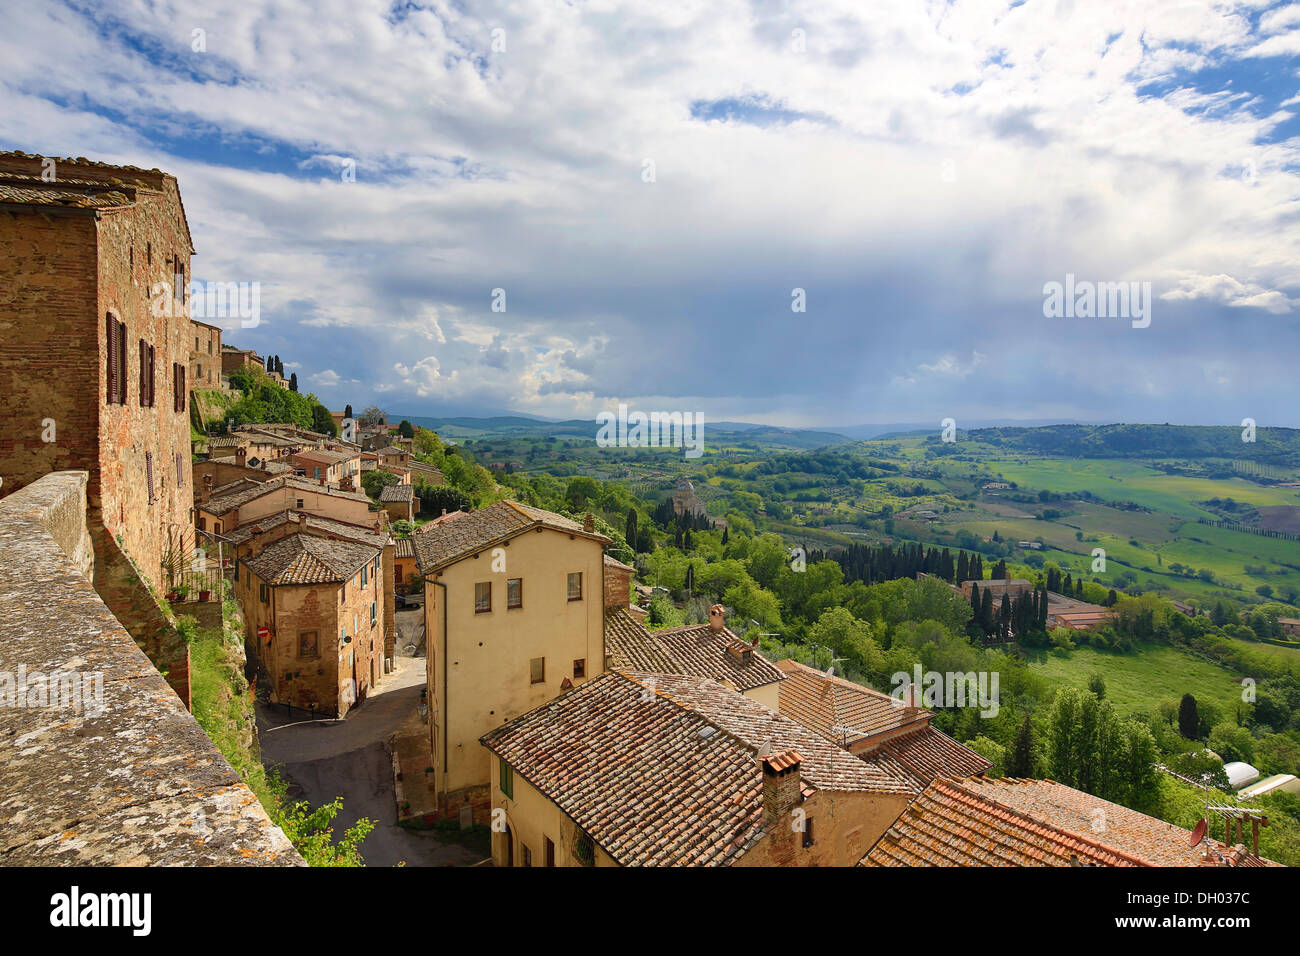 South-west view from Montepulciano, Montepulciano, Tuscany, Italy Stock Photo